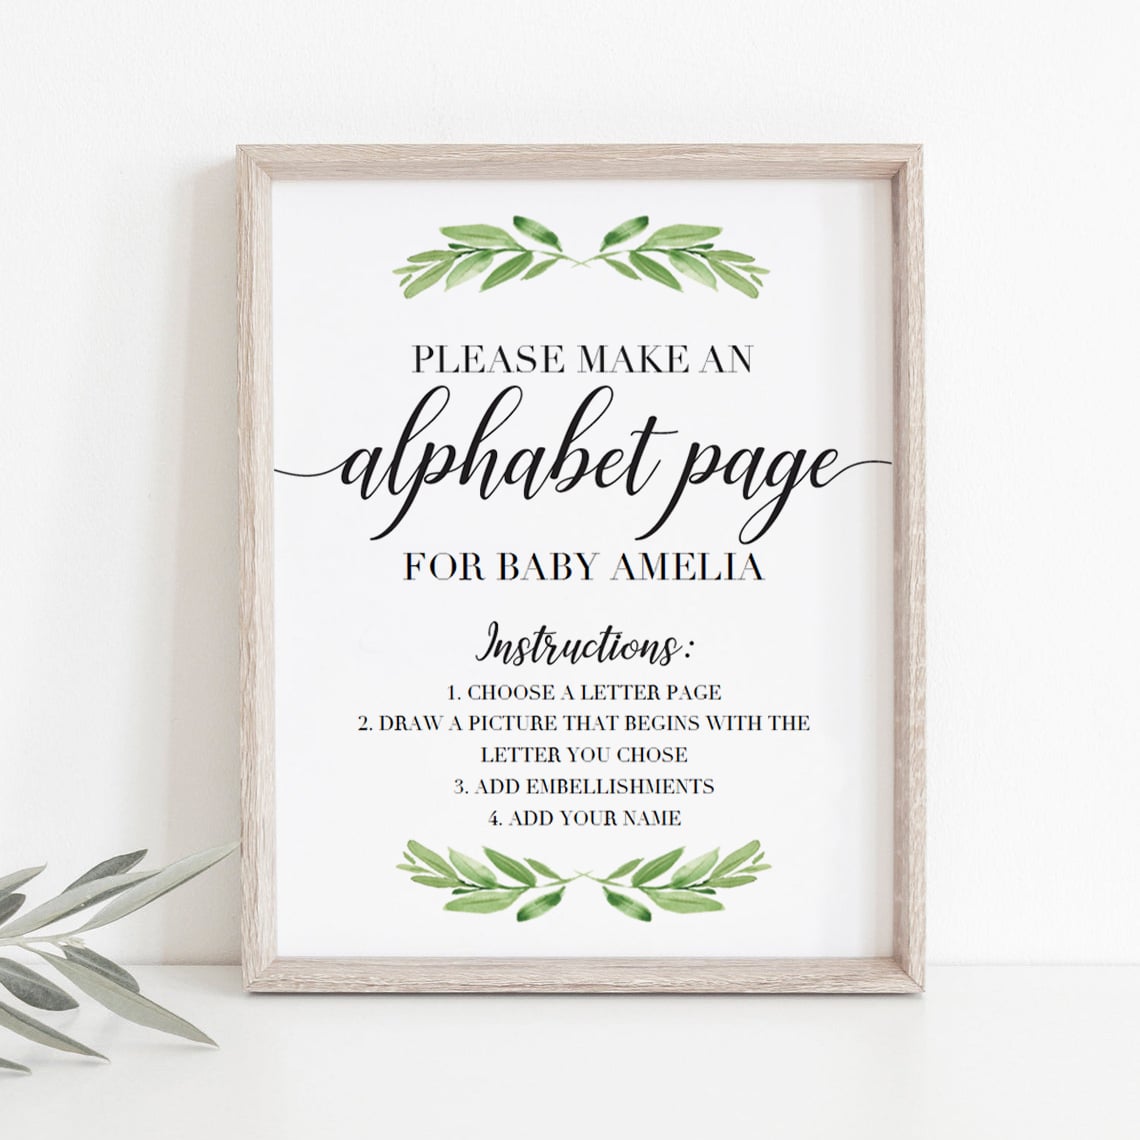 Printable baby shower activity ABC booklet instructions by LittleSizzle